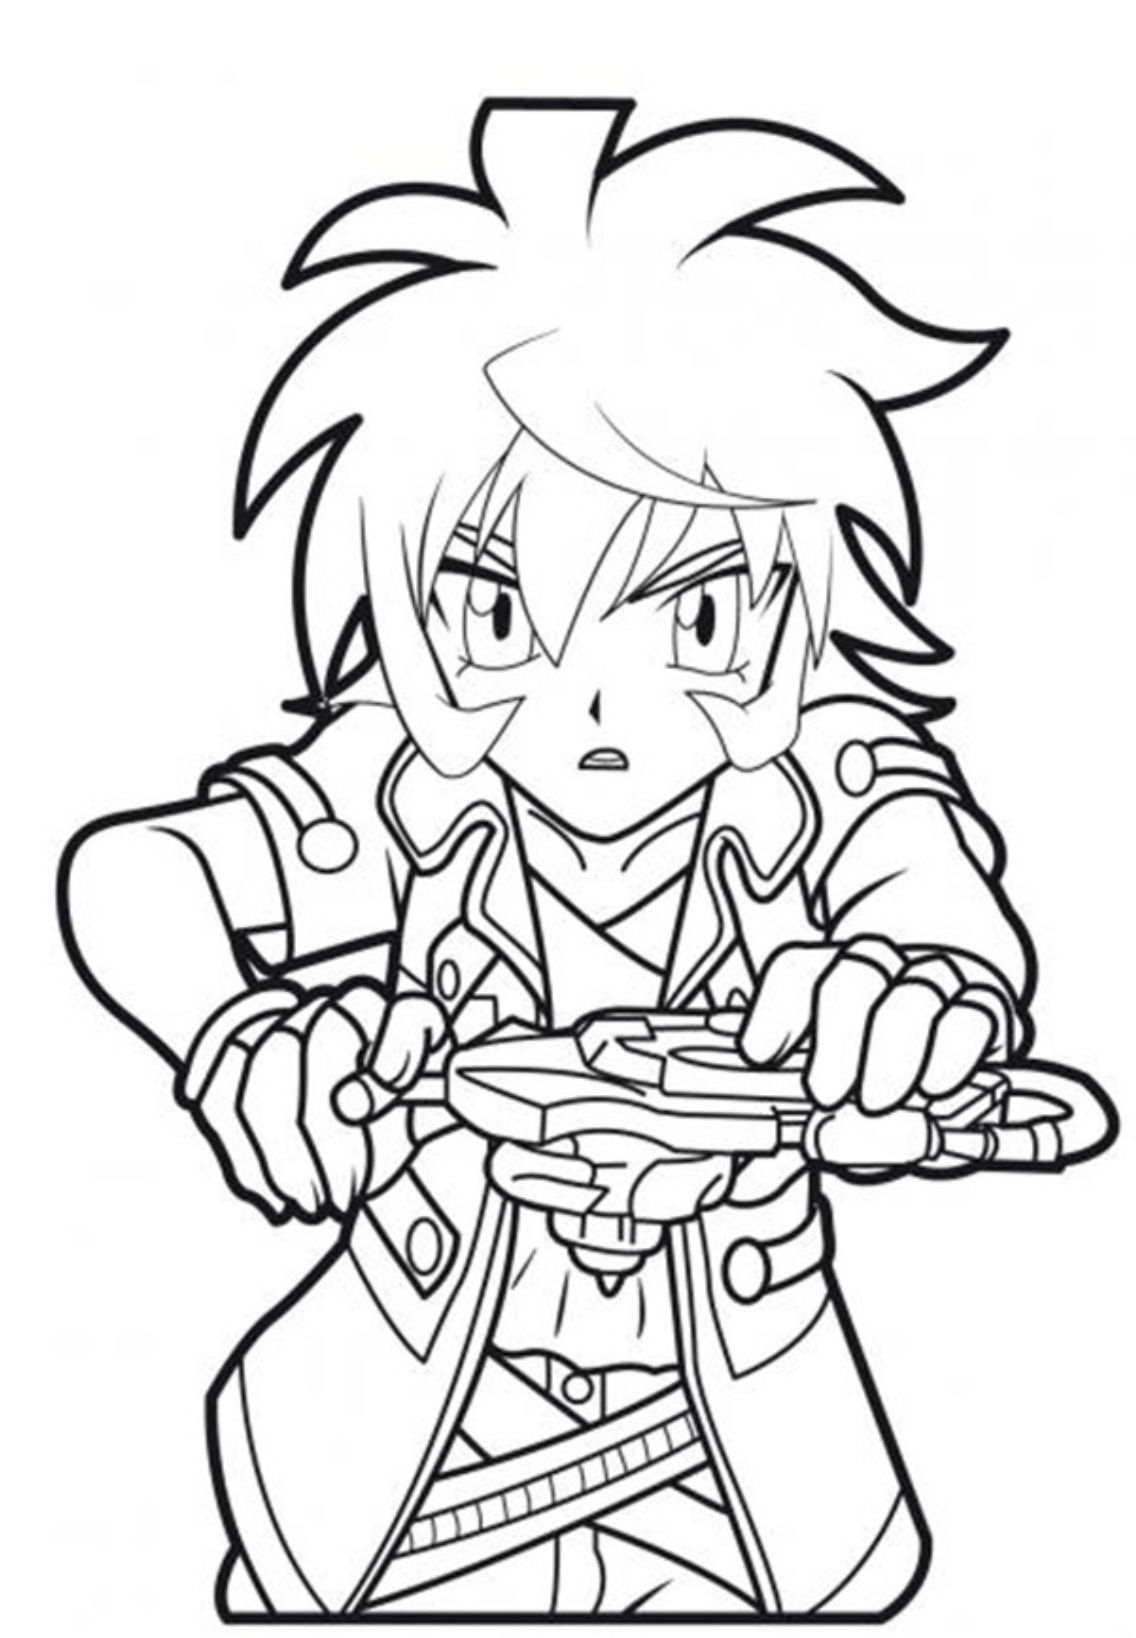 Cartoon Beyblade Coloring Pages | Cartoon Coloring pages of ...